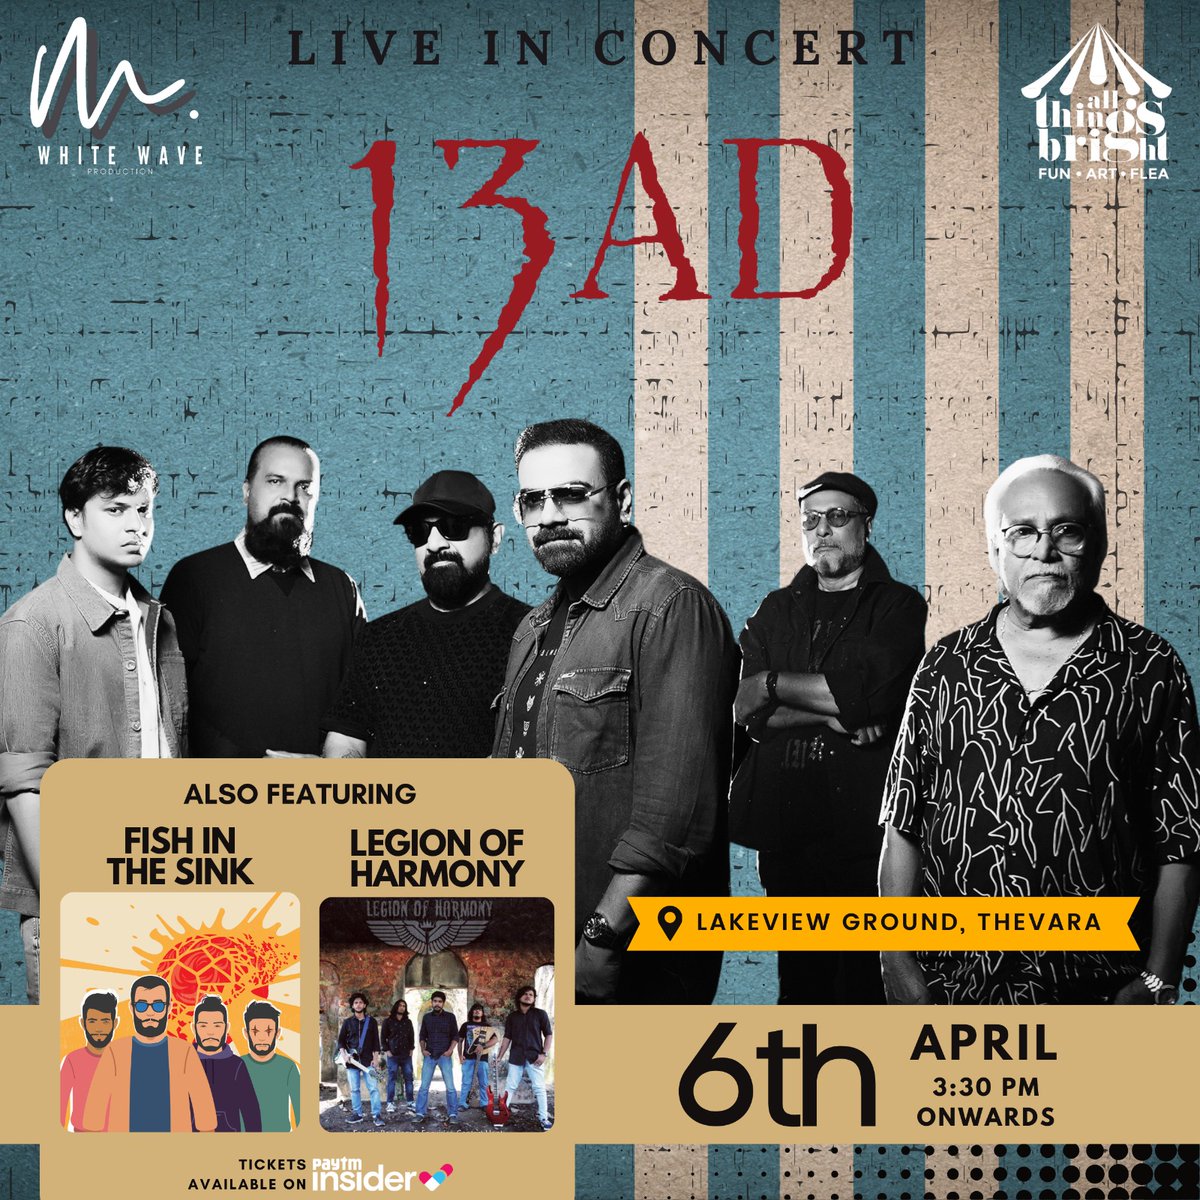 The Return of the Legends! We are excited as much as you are. Let's huddle together and roar for rock!

Book Tickets - insider.in/13-ad-apr6-202…

April 6,2024, 3:30 PM Lakeview Ground, Thevara

#13adband #homecoming #rockband #musicband #letsrocknroll #godsowncounty #kerala #13ad